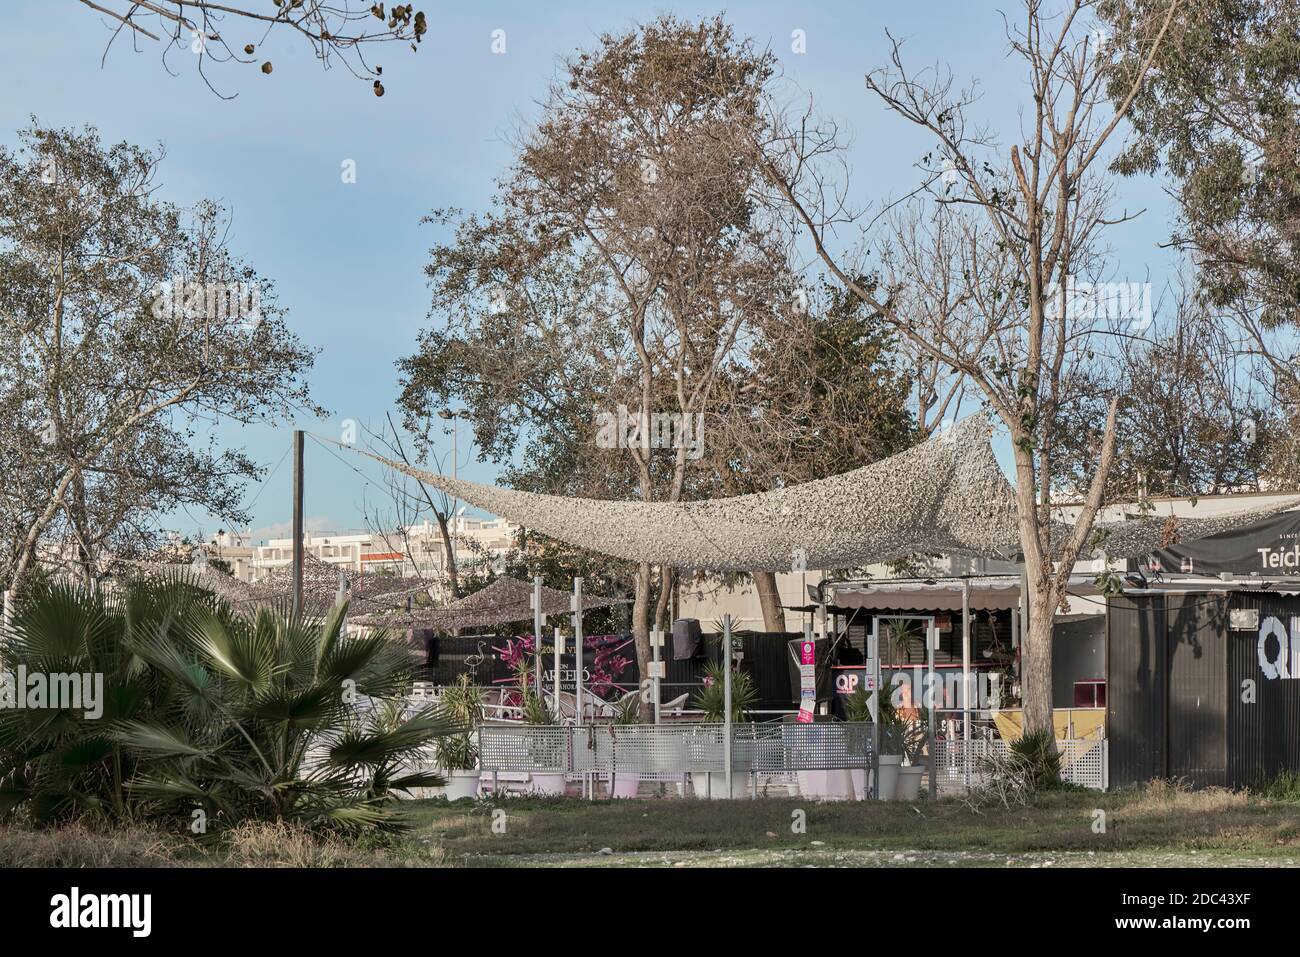 disco, bar, pub with a tent, plants, trees and flowers in the open air on the beach of the town of Borriana, Burriana, Castello, Castellon, Spain. Stock Photo